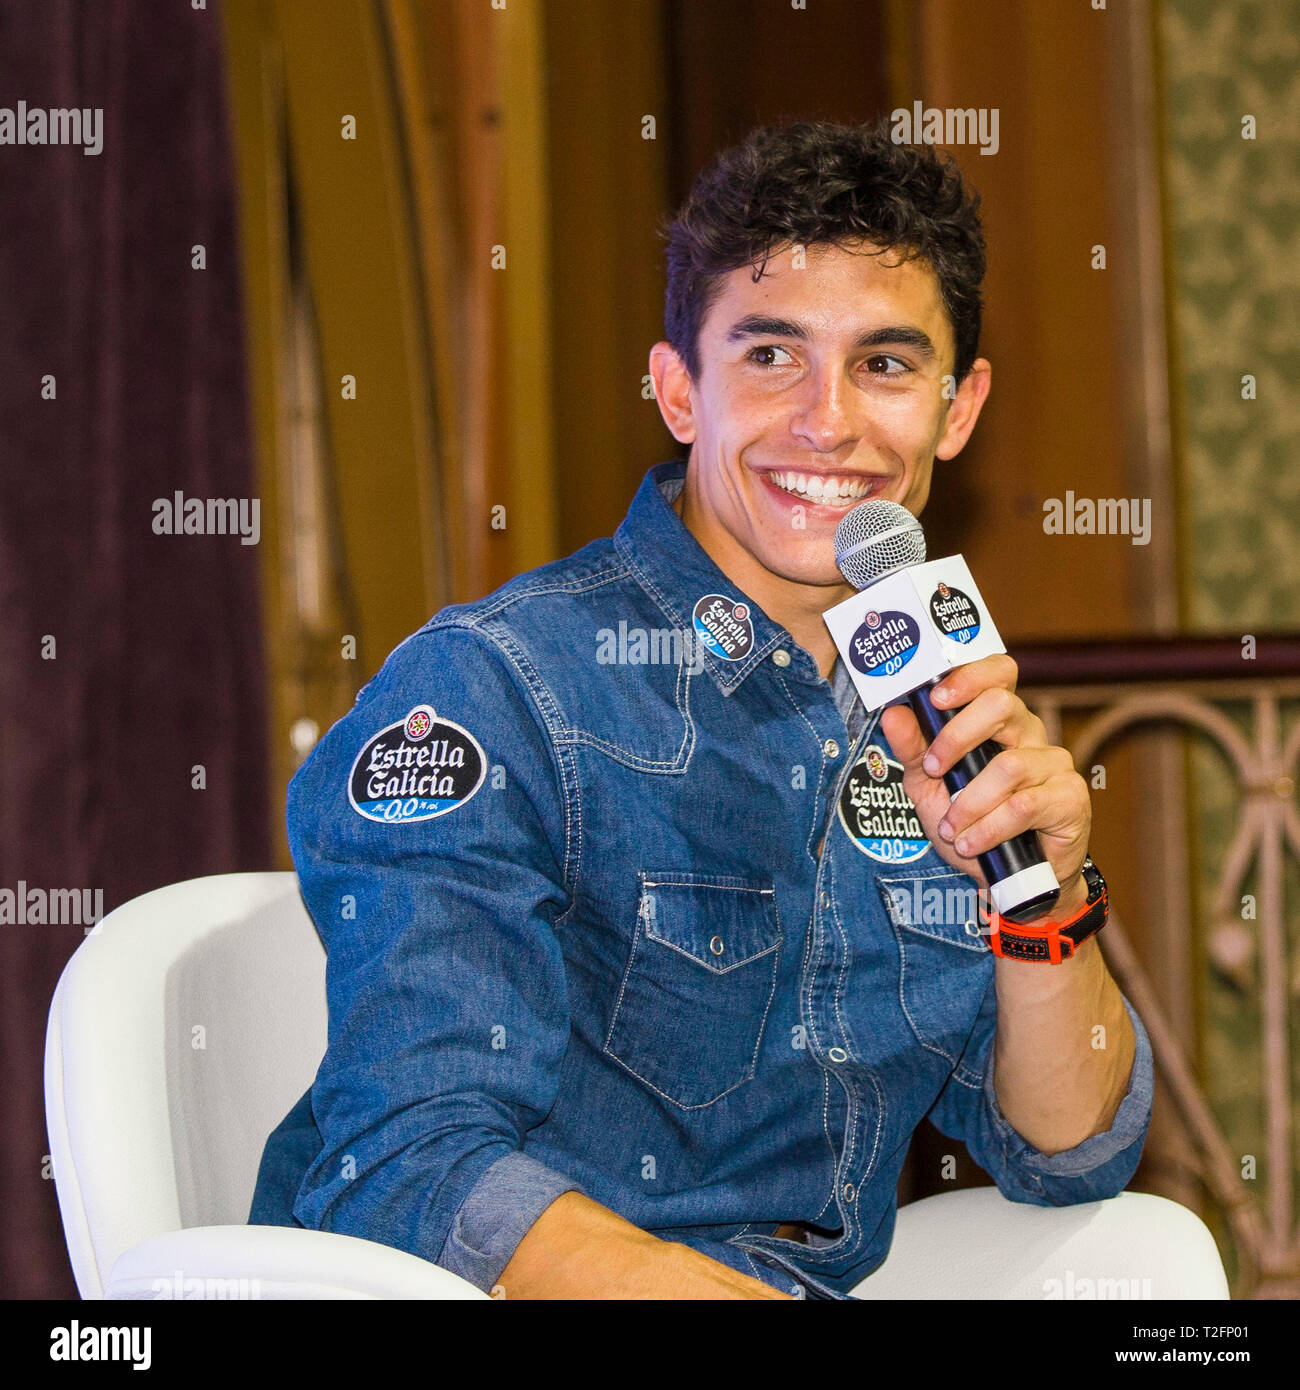 SÃO PAULO, SP - 02.04.2019: COLETIVA DO PILOTO MARC MARQUEZ - Press Conference with pilots Marc Márquez and Alexandre Barros held at Centro Cultural Rio Verde in São Paulo, SP. Held by the sponsor, the Spanish brewery Estrella Galicia, the riders highlighted the 2019 season of Moto GP and Superbike Brazil, respectively. (Photo: Emerson Santos/Fotoarena) Stock Photo